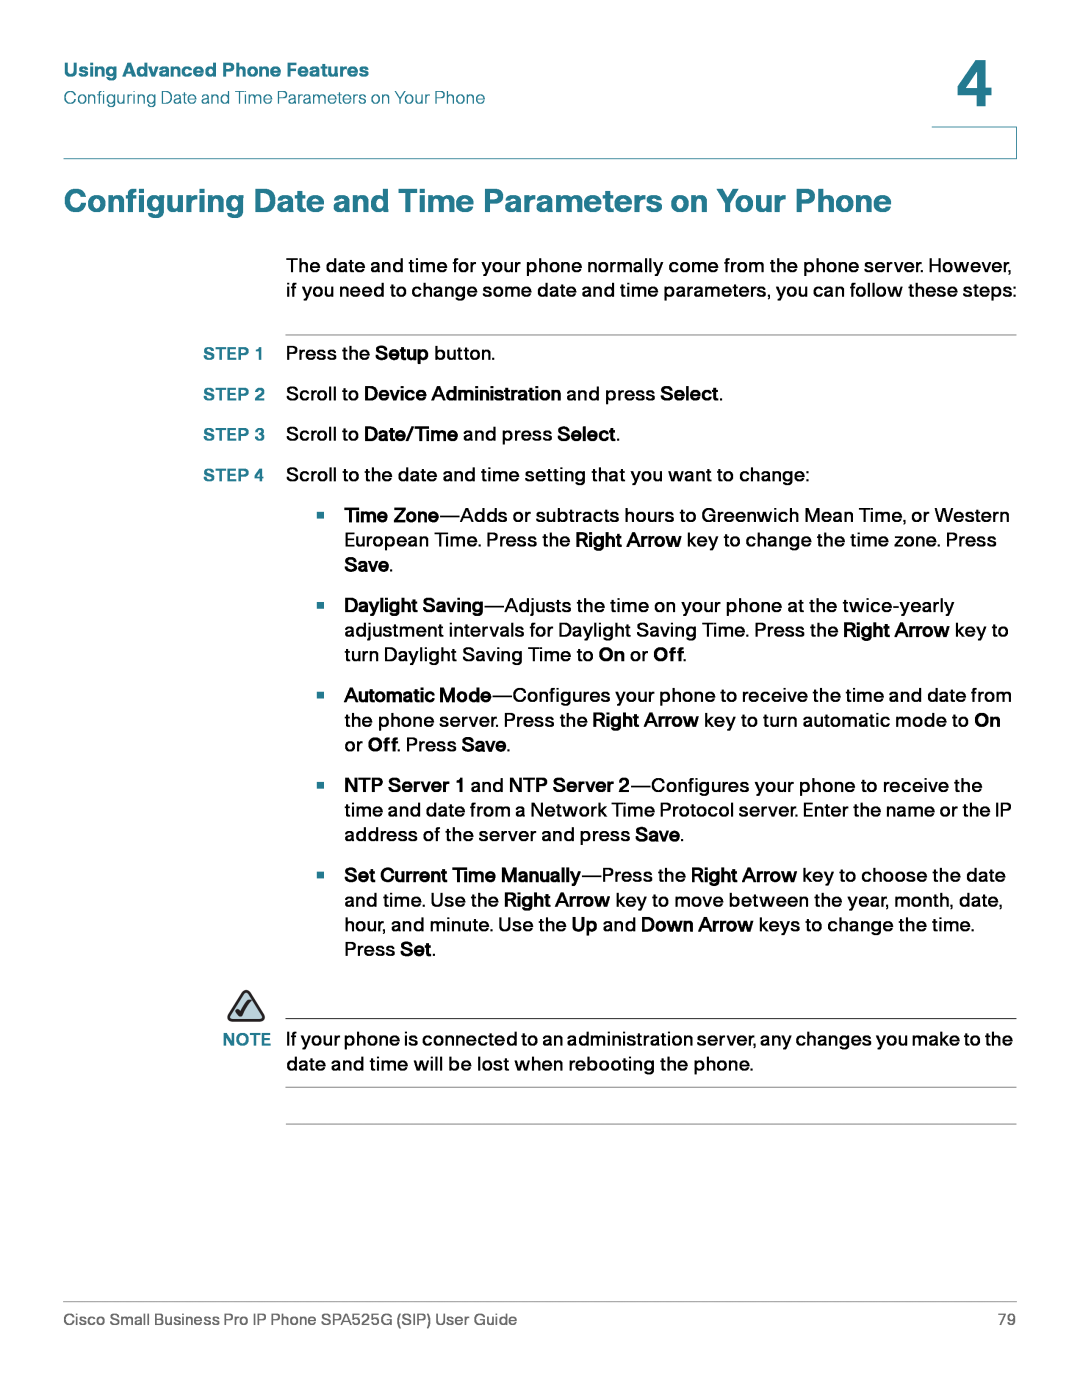 Cisco Systems SPA525G manual Configuring Date and Time Parameters on Your Phone, Using Advanced Phone Features 